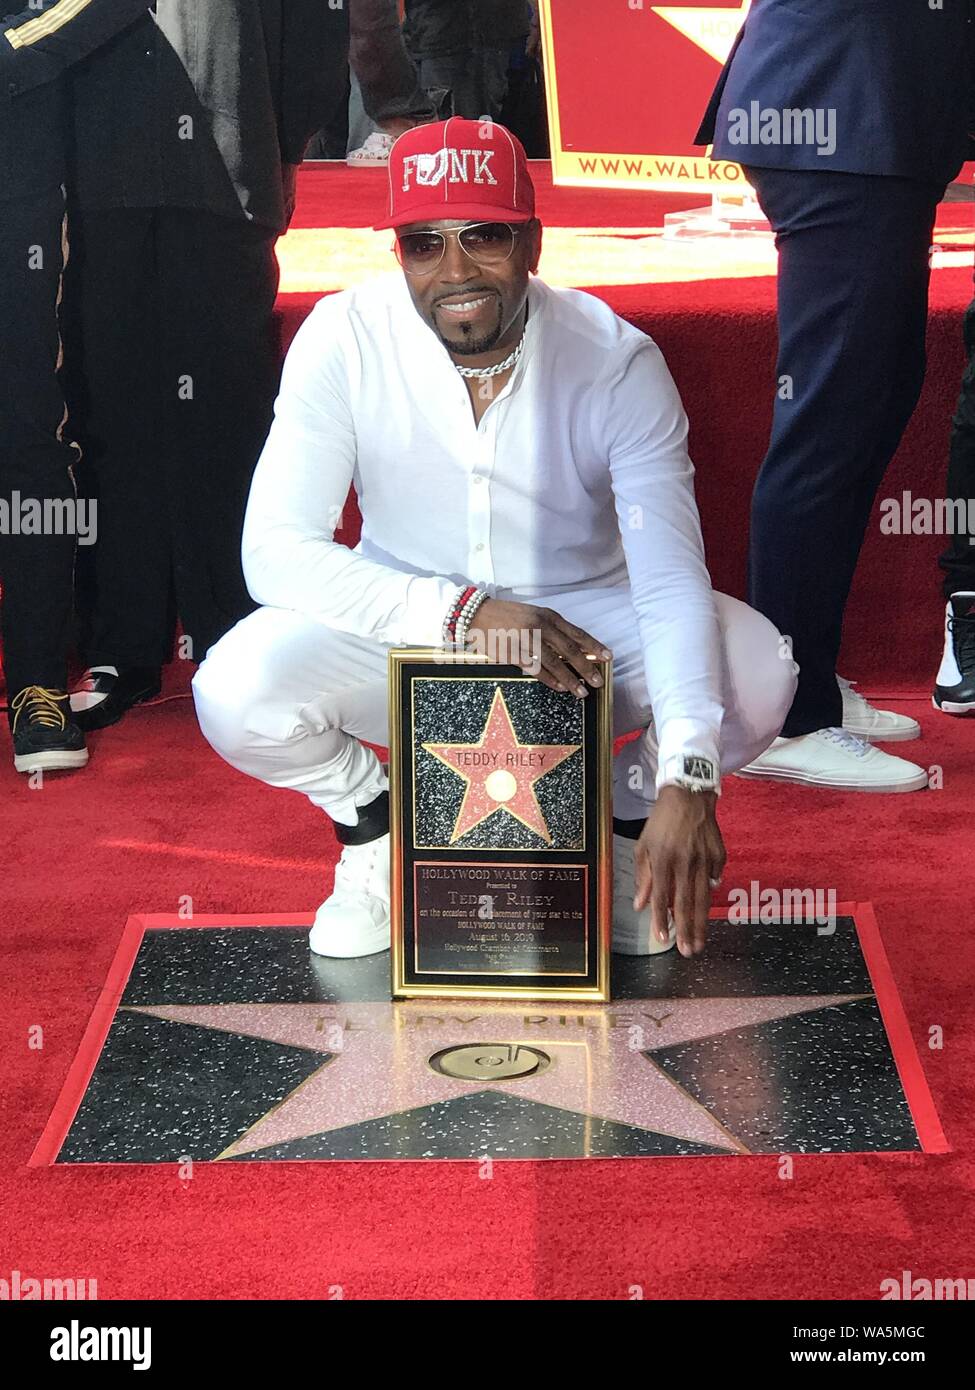 August 16, 2019, Hollywood, California, USA: I16060CHW.Hollywood Chamber Of Commerce Honor Recording Artist/Music Producer TEDDY RILEY With Star On The Hollywood Walk Of Fame.6405 Hollywood Boulevard, Hollywood, California, USA  .08/16/2019 .TEDDY RILEY.Â©Clinton H.Wallace/Photomundo International/  Photos Inc  (Credit Image: © Clinton Wallace/Globe Photos via ZUMA Wire) Stock Photo